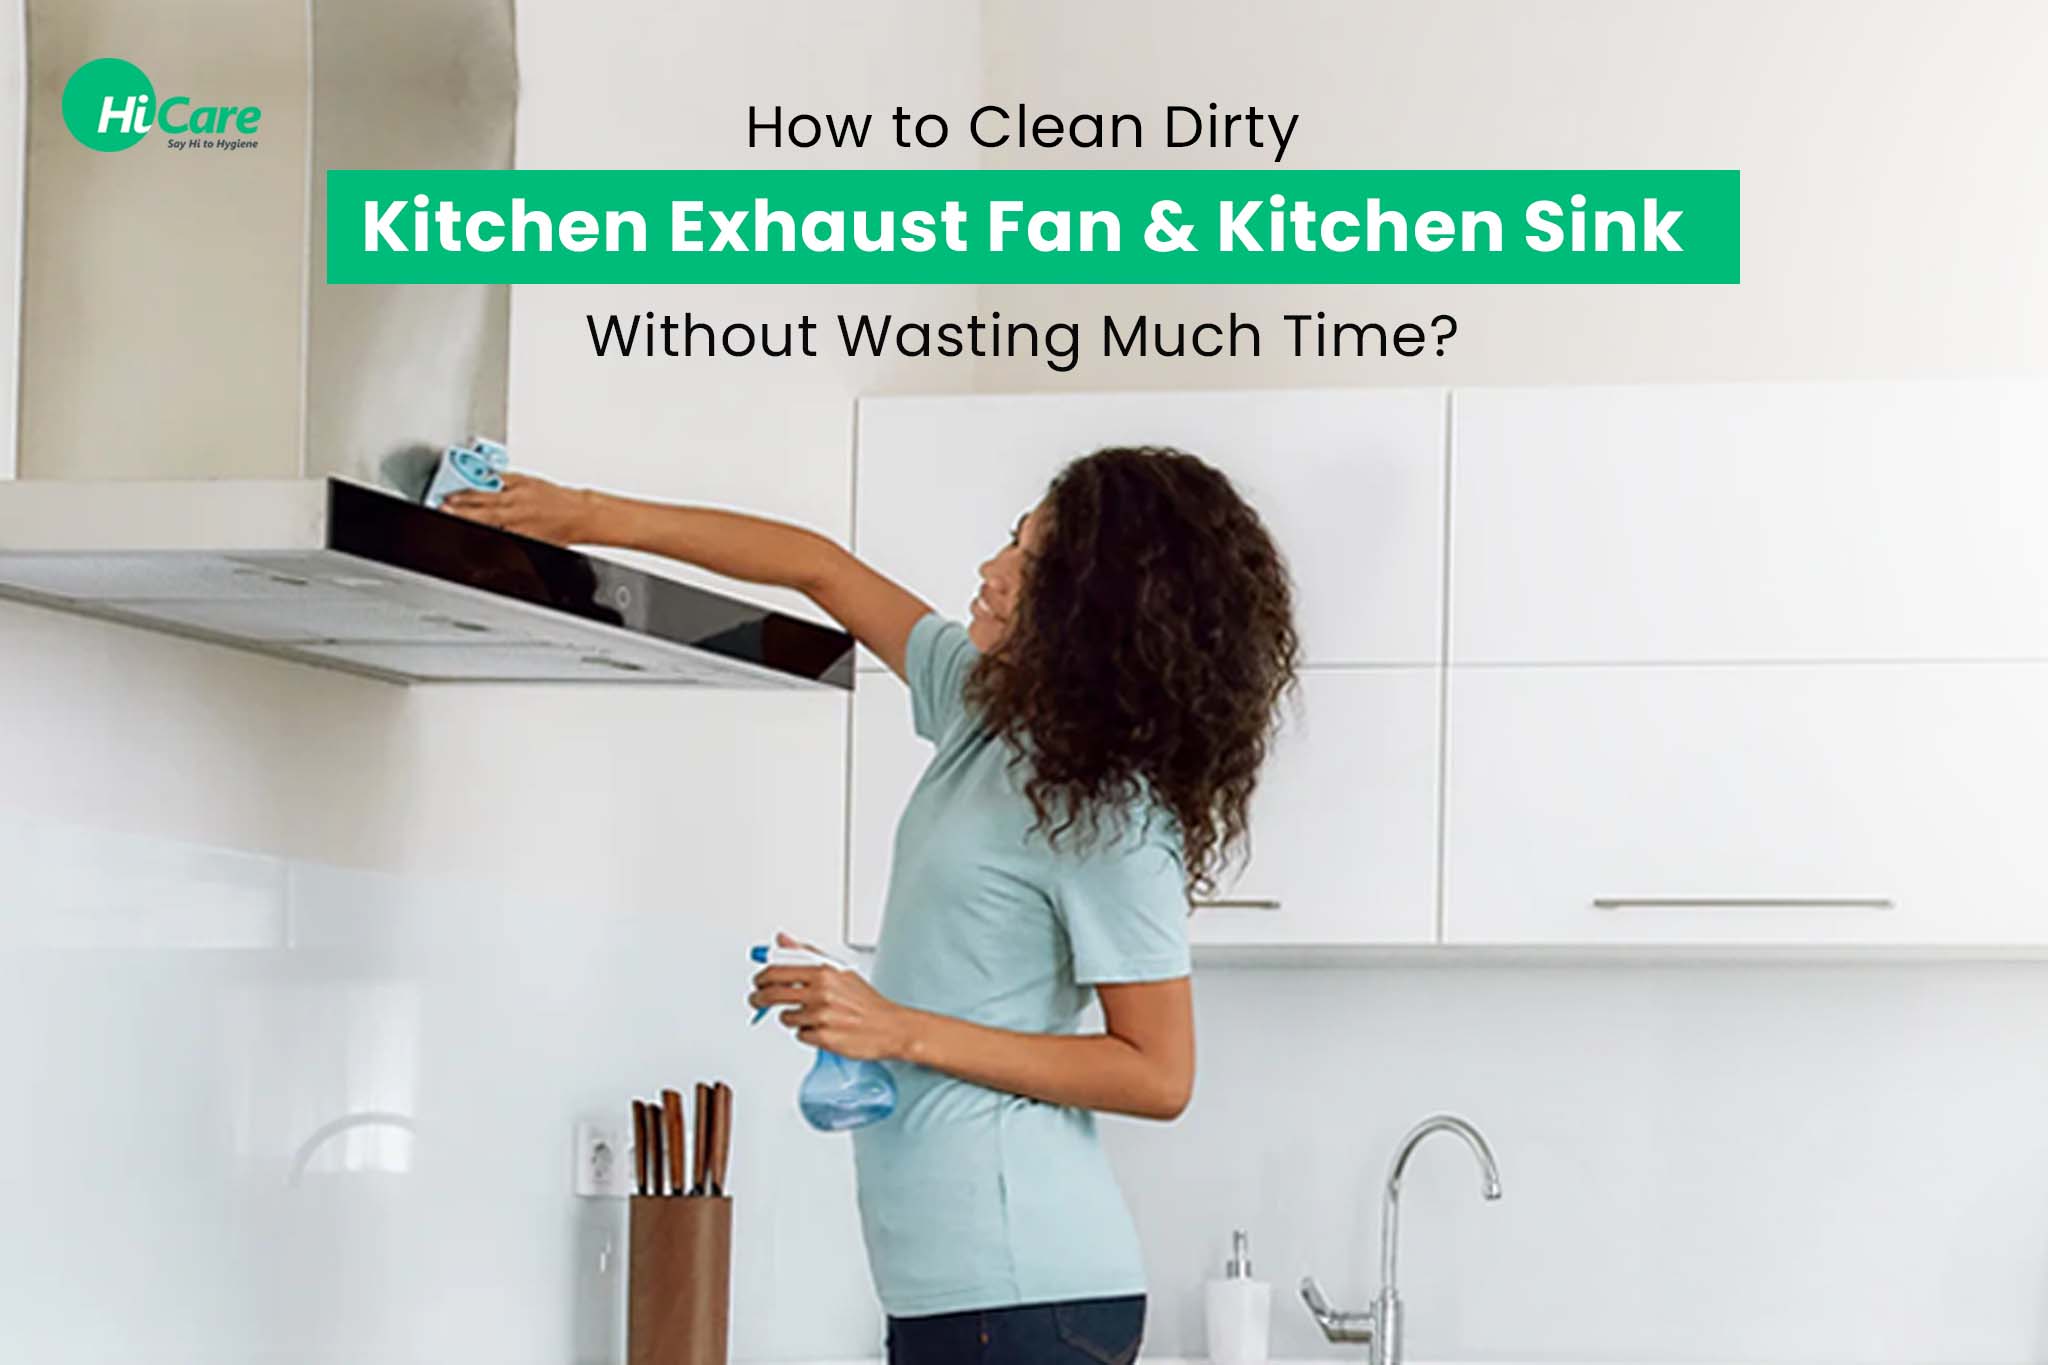 How To Clean Dirty Kitchen Exhaust Fan And Kitchen Sink Without Wasting Much Time 